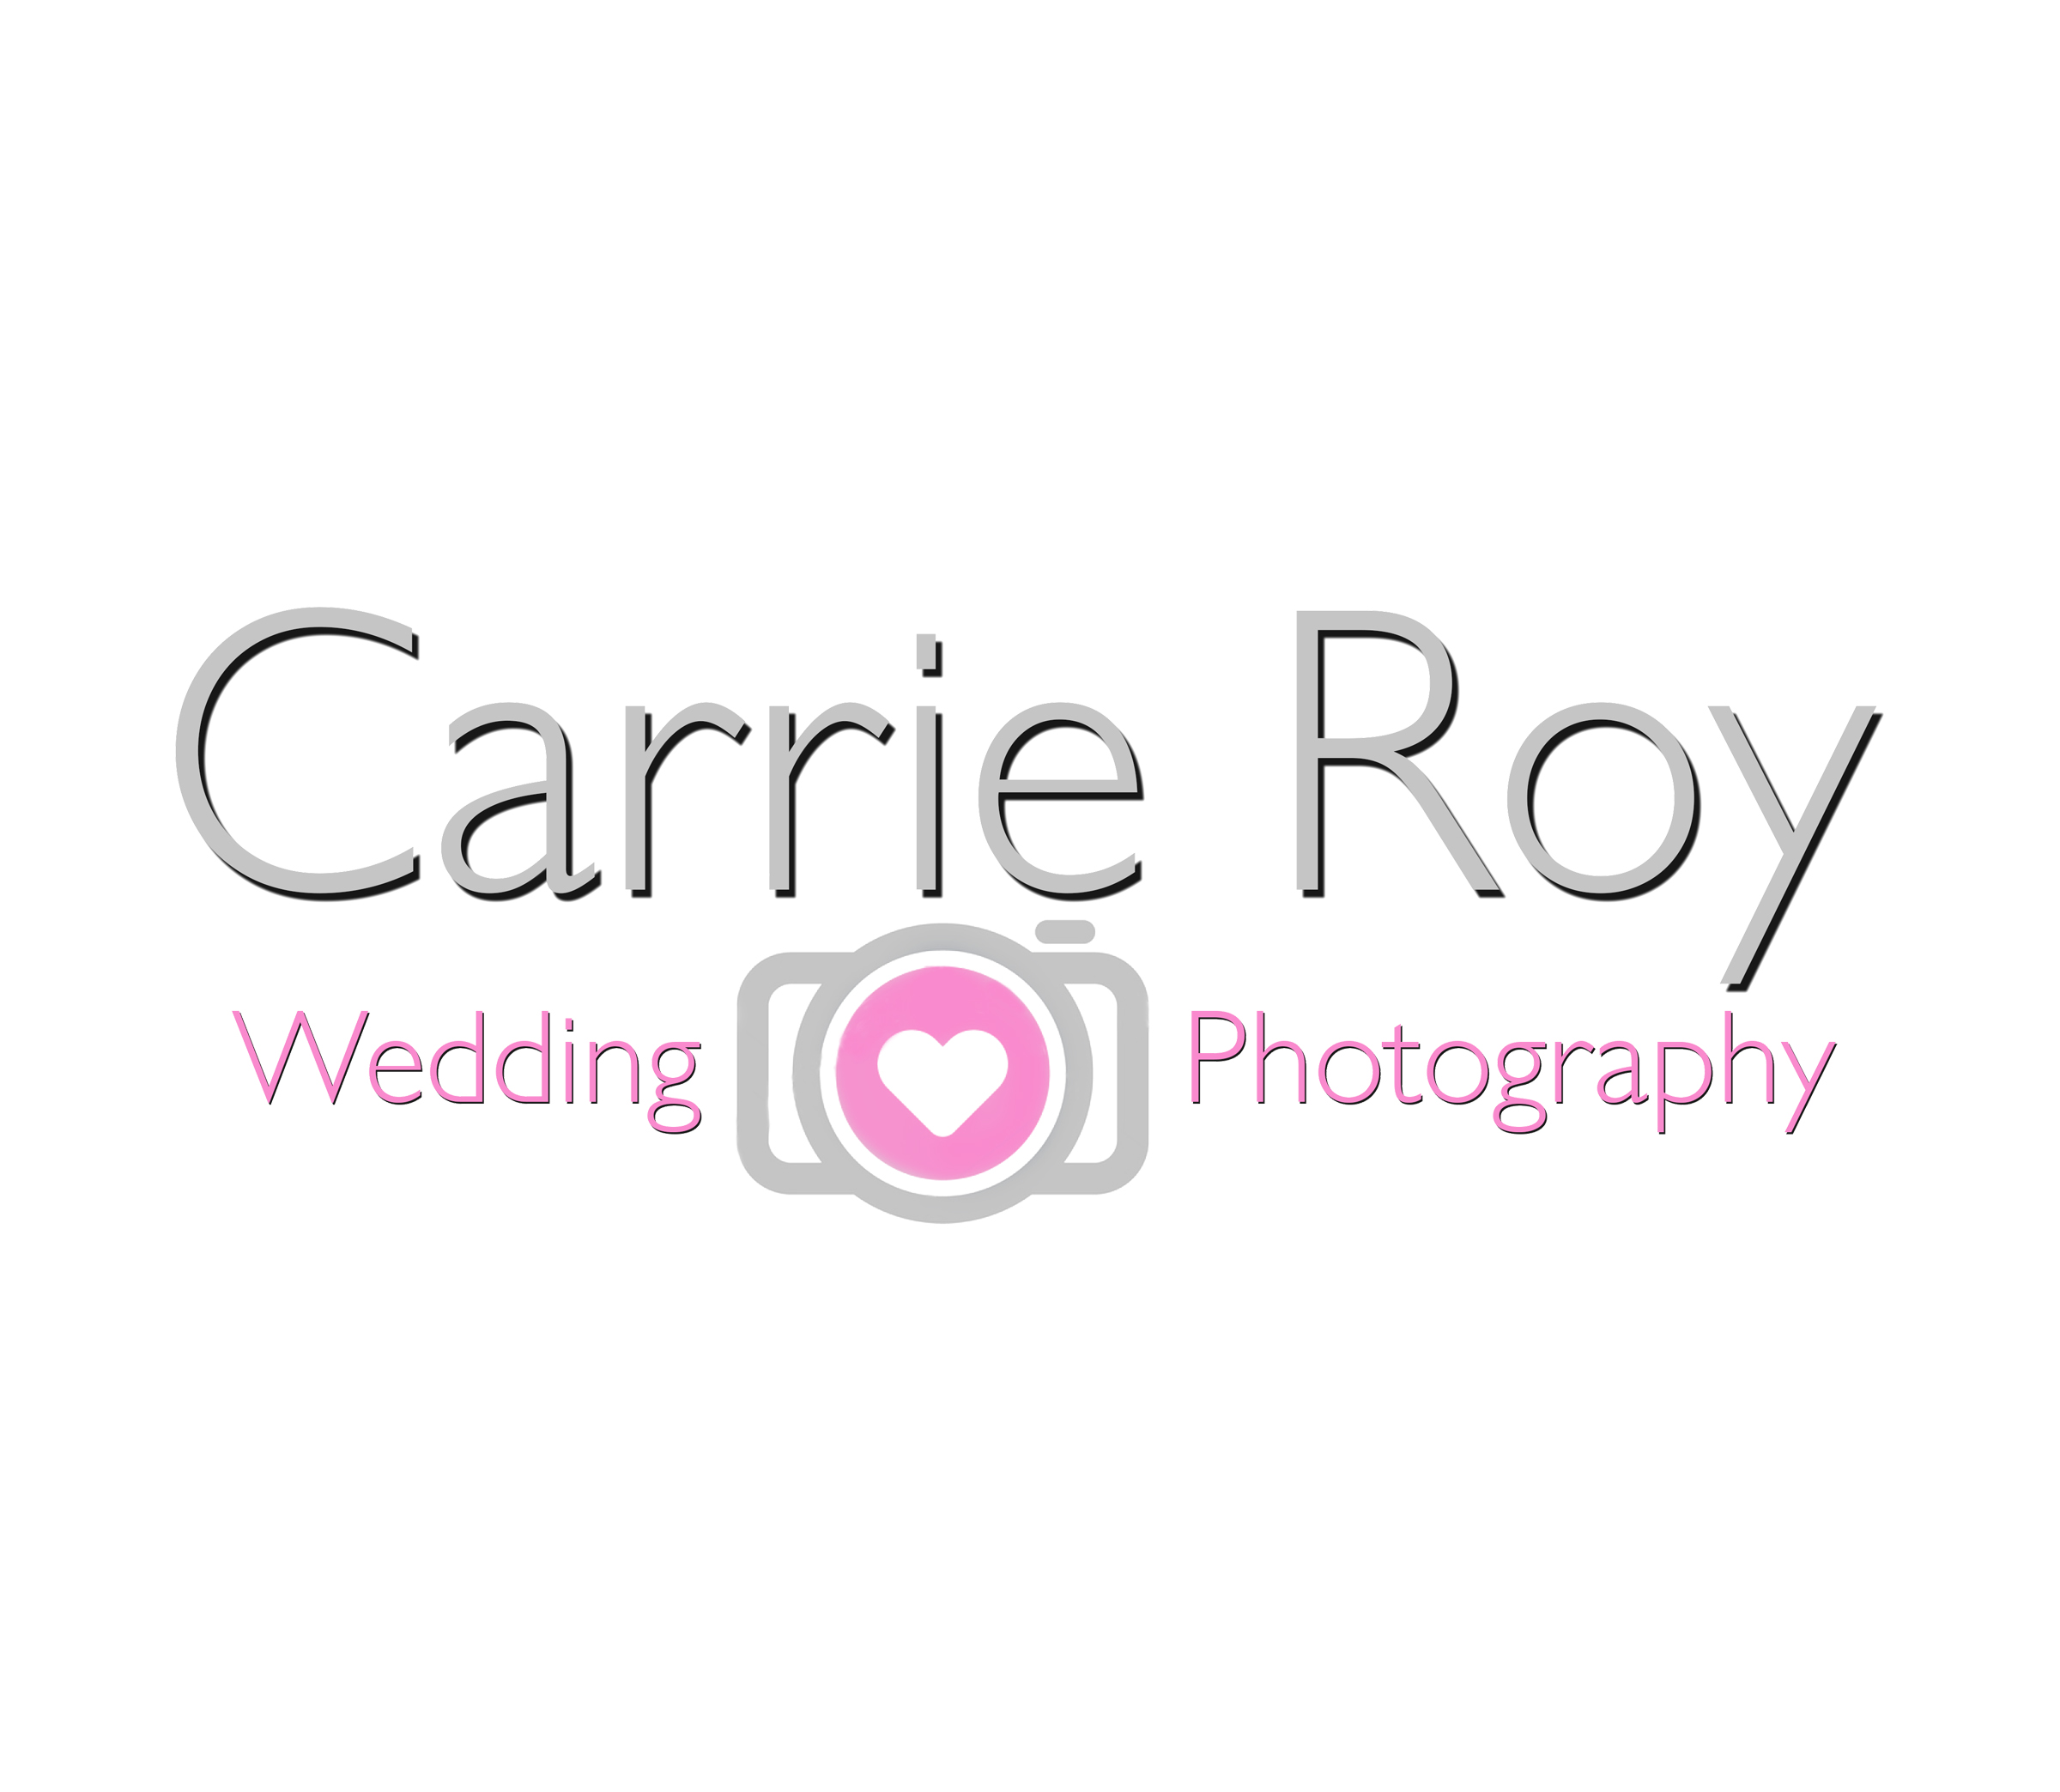 Logo of Carrie Roy Wedding Photography